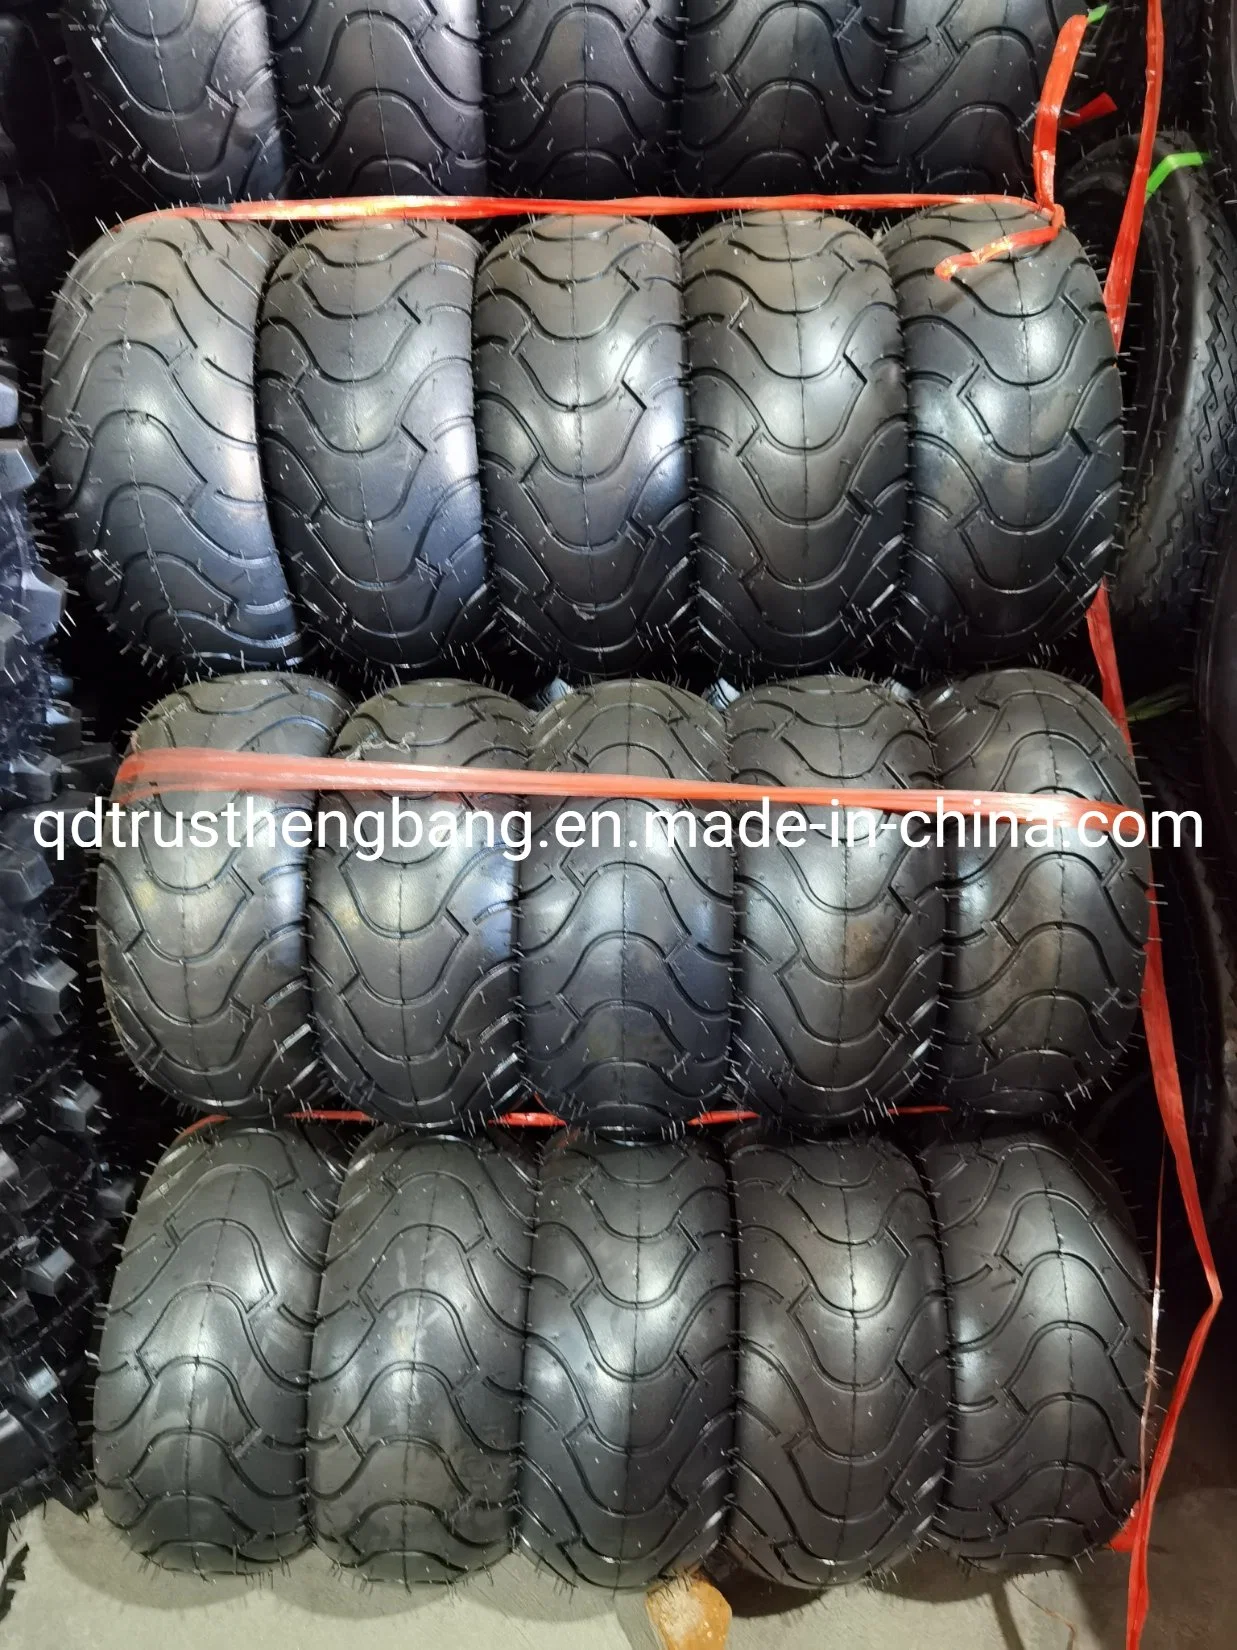 13X5.00-6 Electric Scooter Tires Tyre Baby Stroller Tire, Kids Tricycle Tyre, Unicycle Tyre Bike Tyre Bicycle Tire